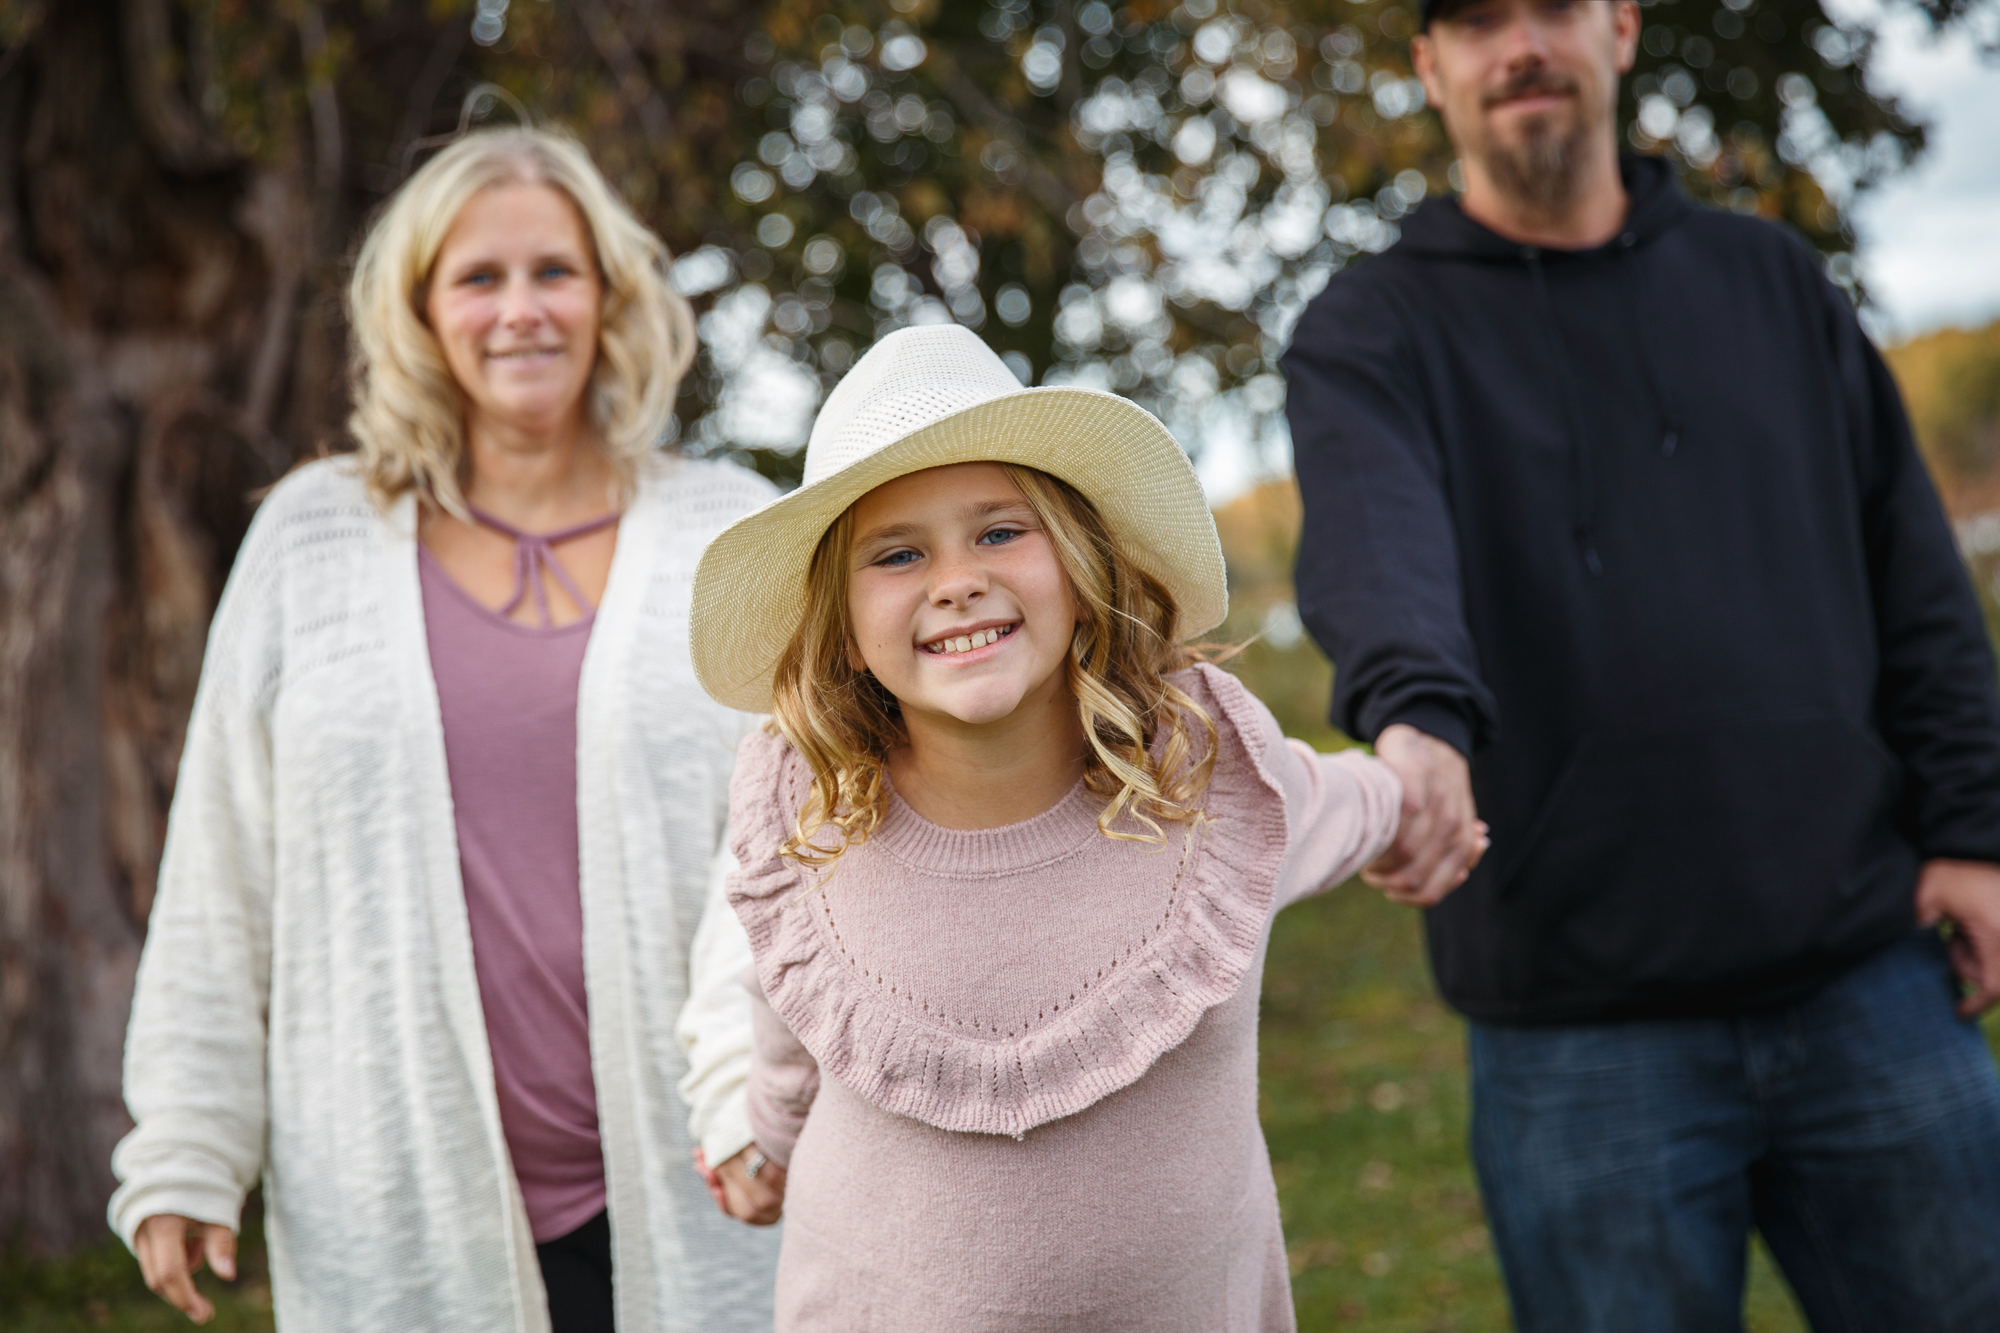 A photo of a girl wearing a hat with her parents taken during a photo mini session